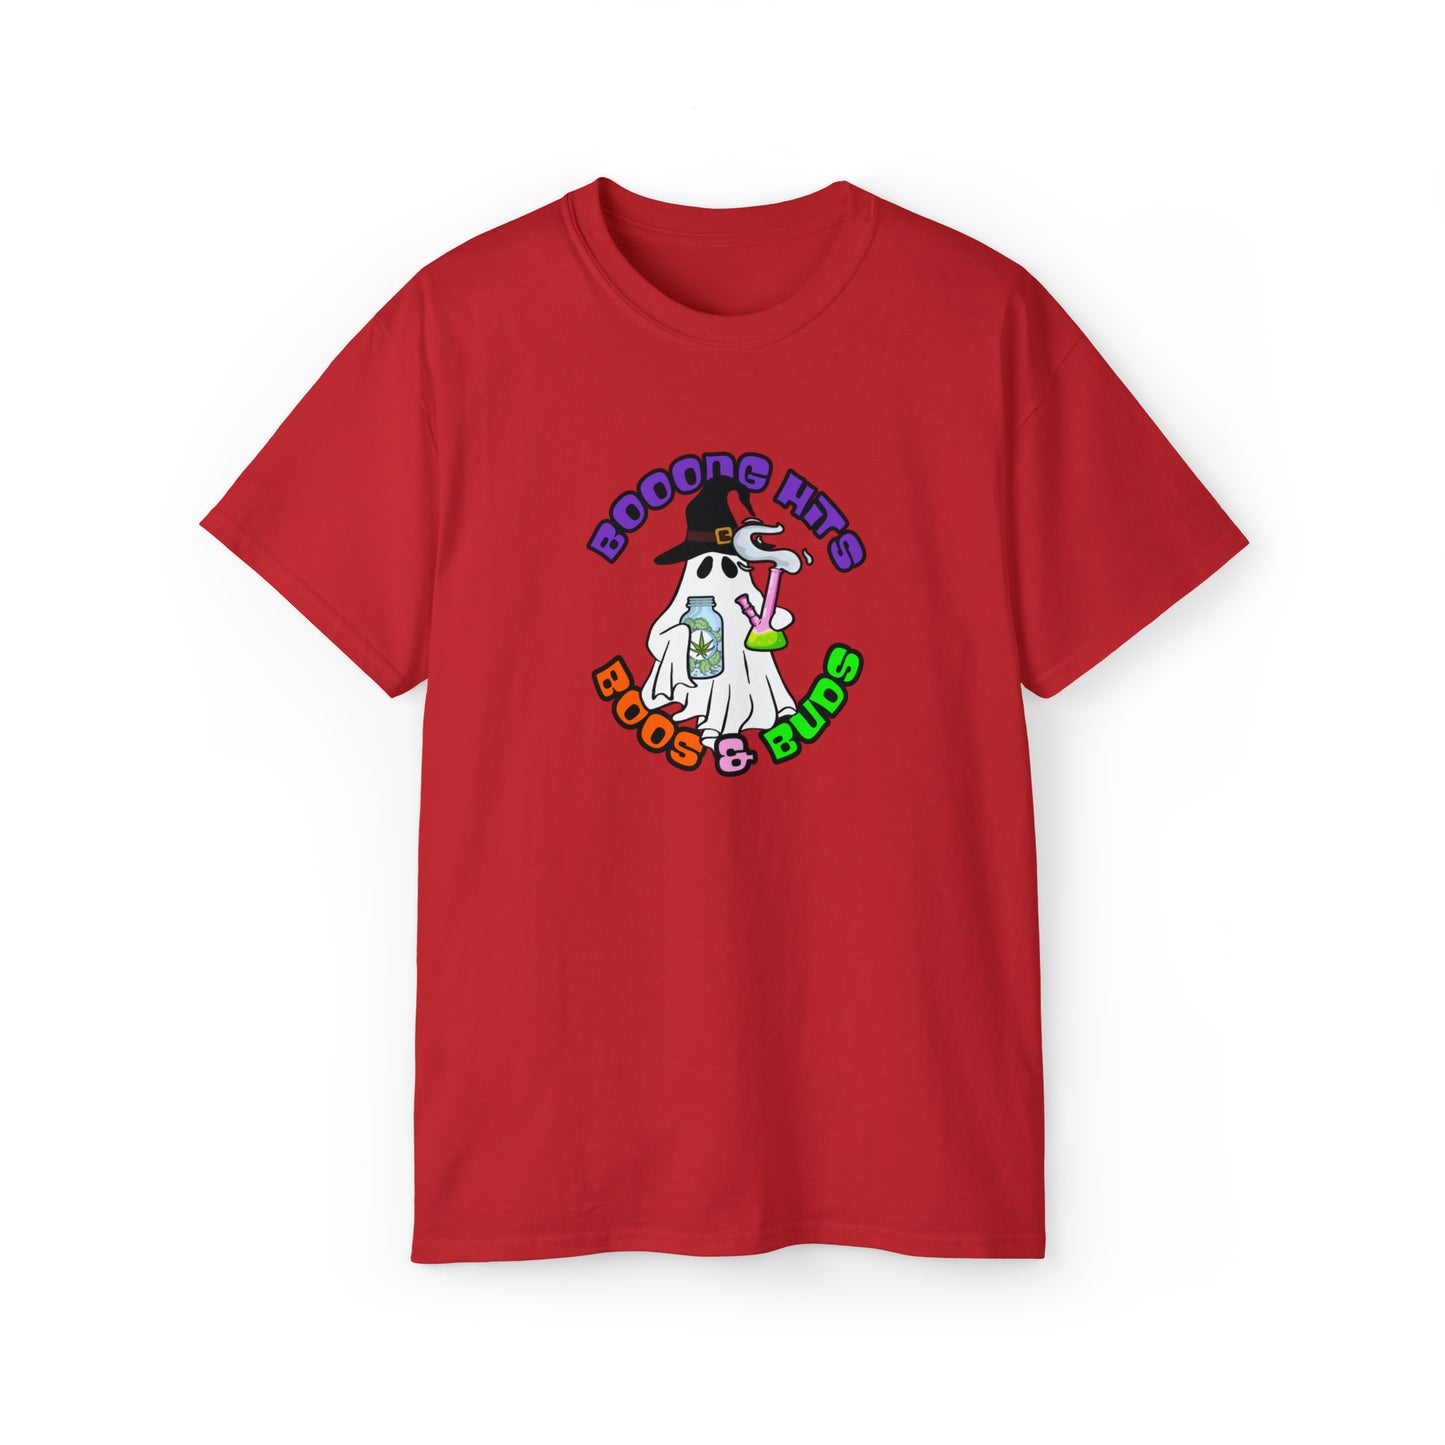 Red Booong Hits Boos & Buds Weed Shirt